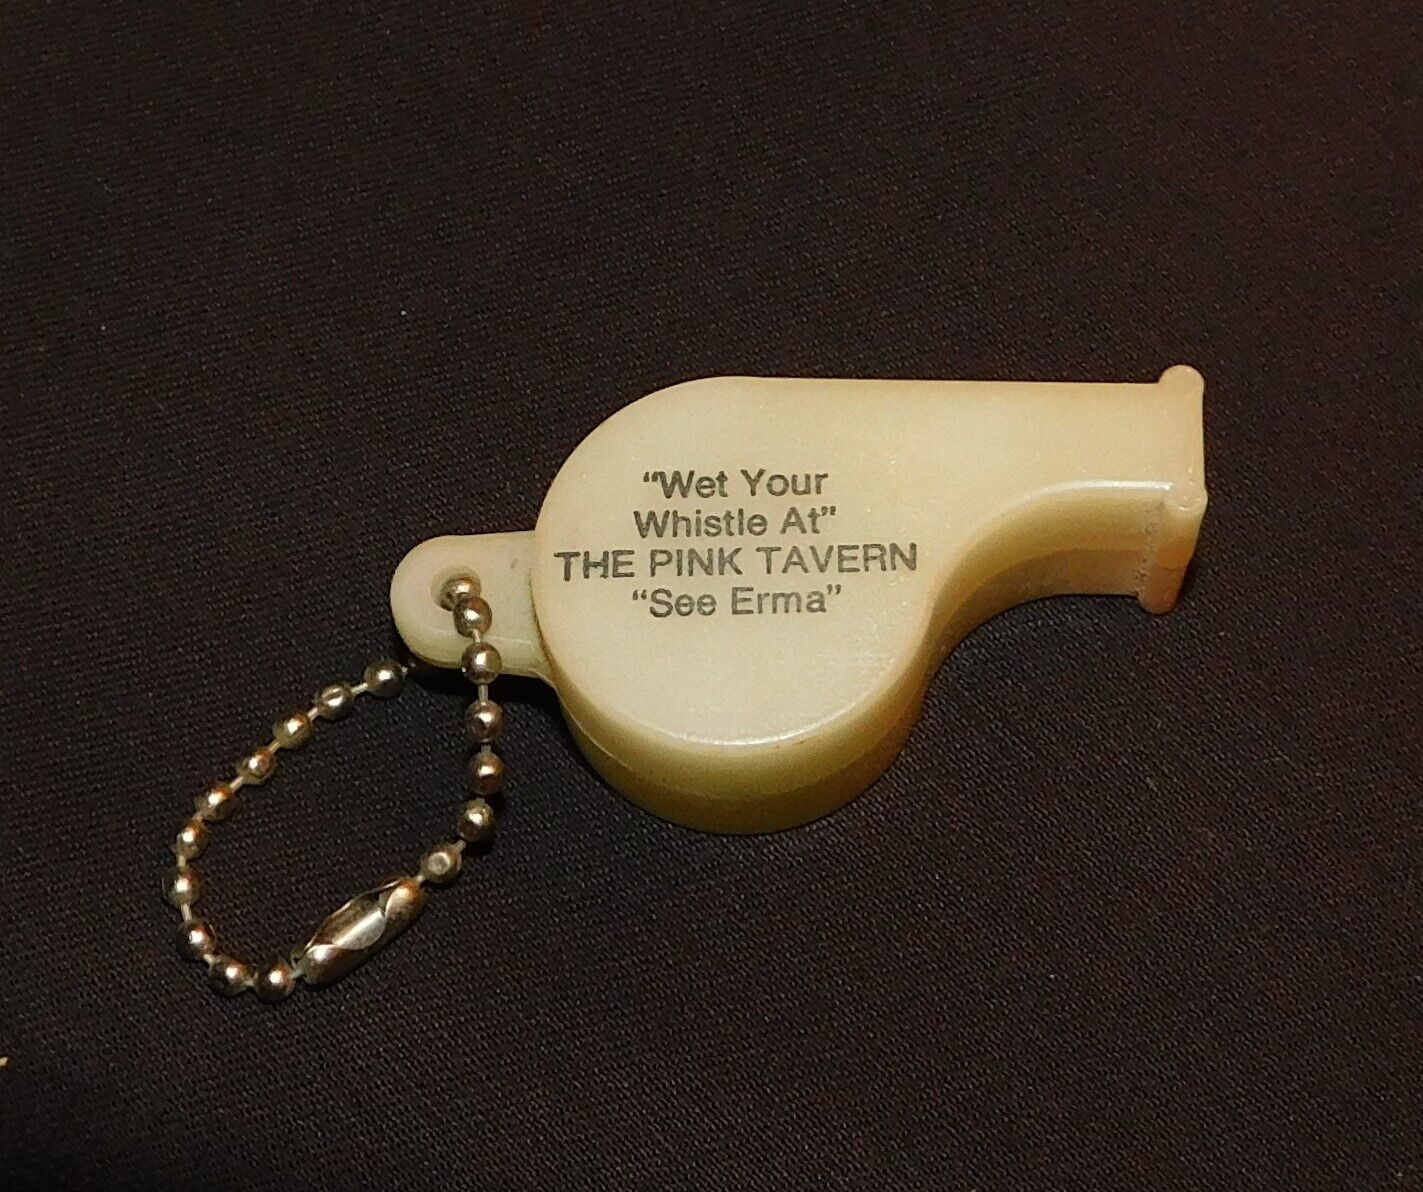 Wet Your Whistle PINK TAVERN Lomax Illinois Whistle Advertising